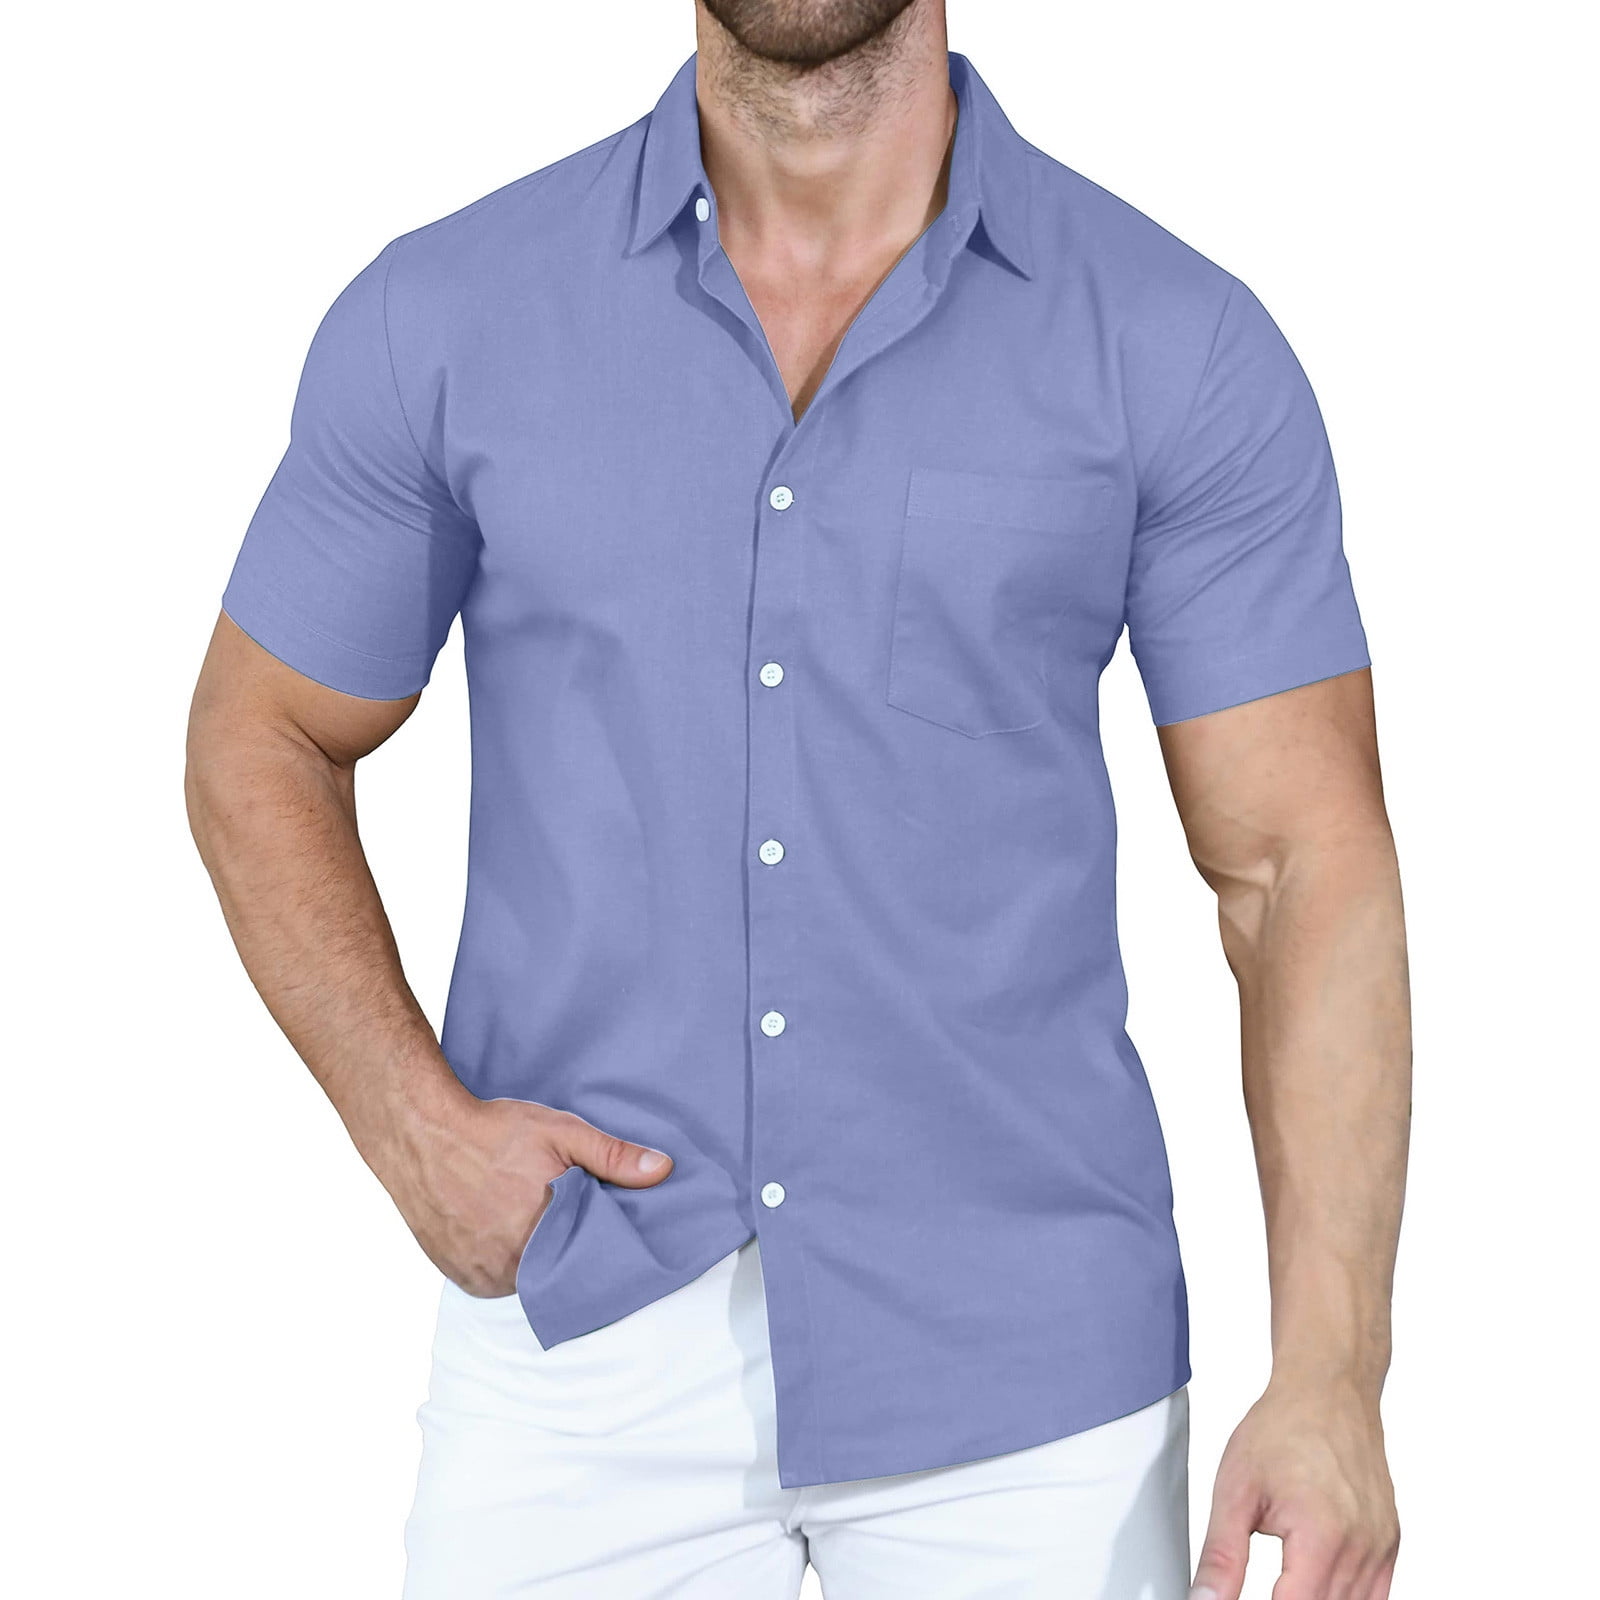 YYDGH Men's Muscle Dress Shirts Slim Fit Stretch Short Sleeve